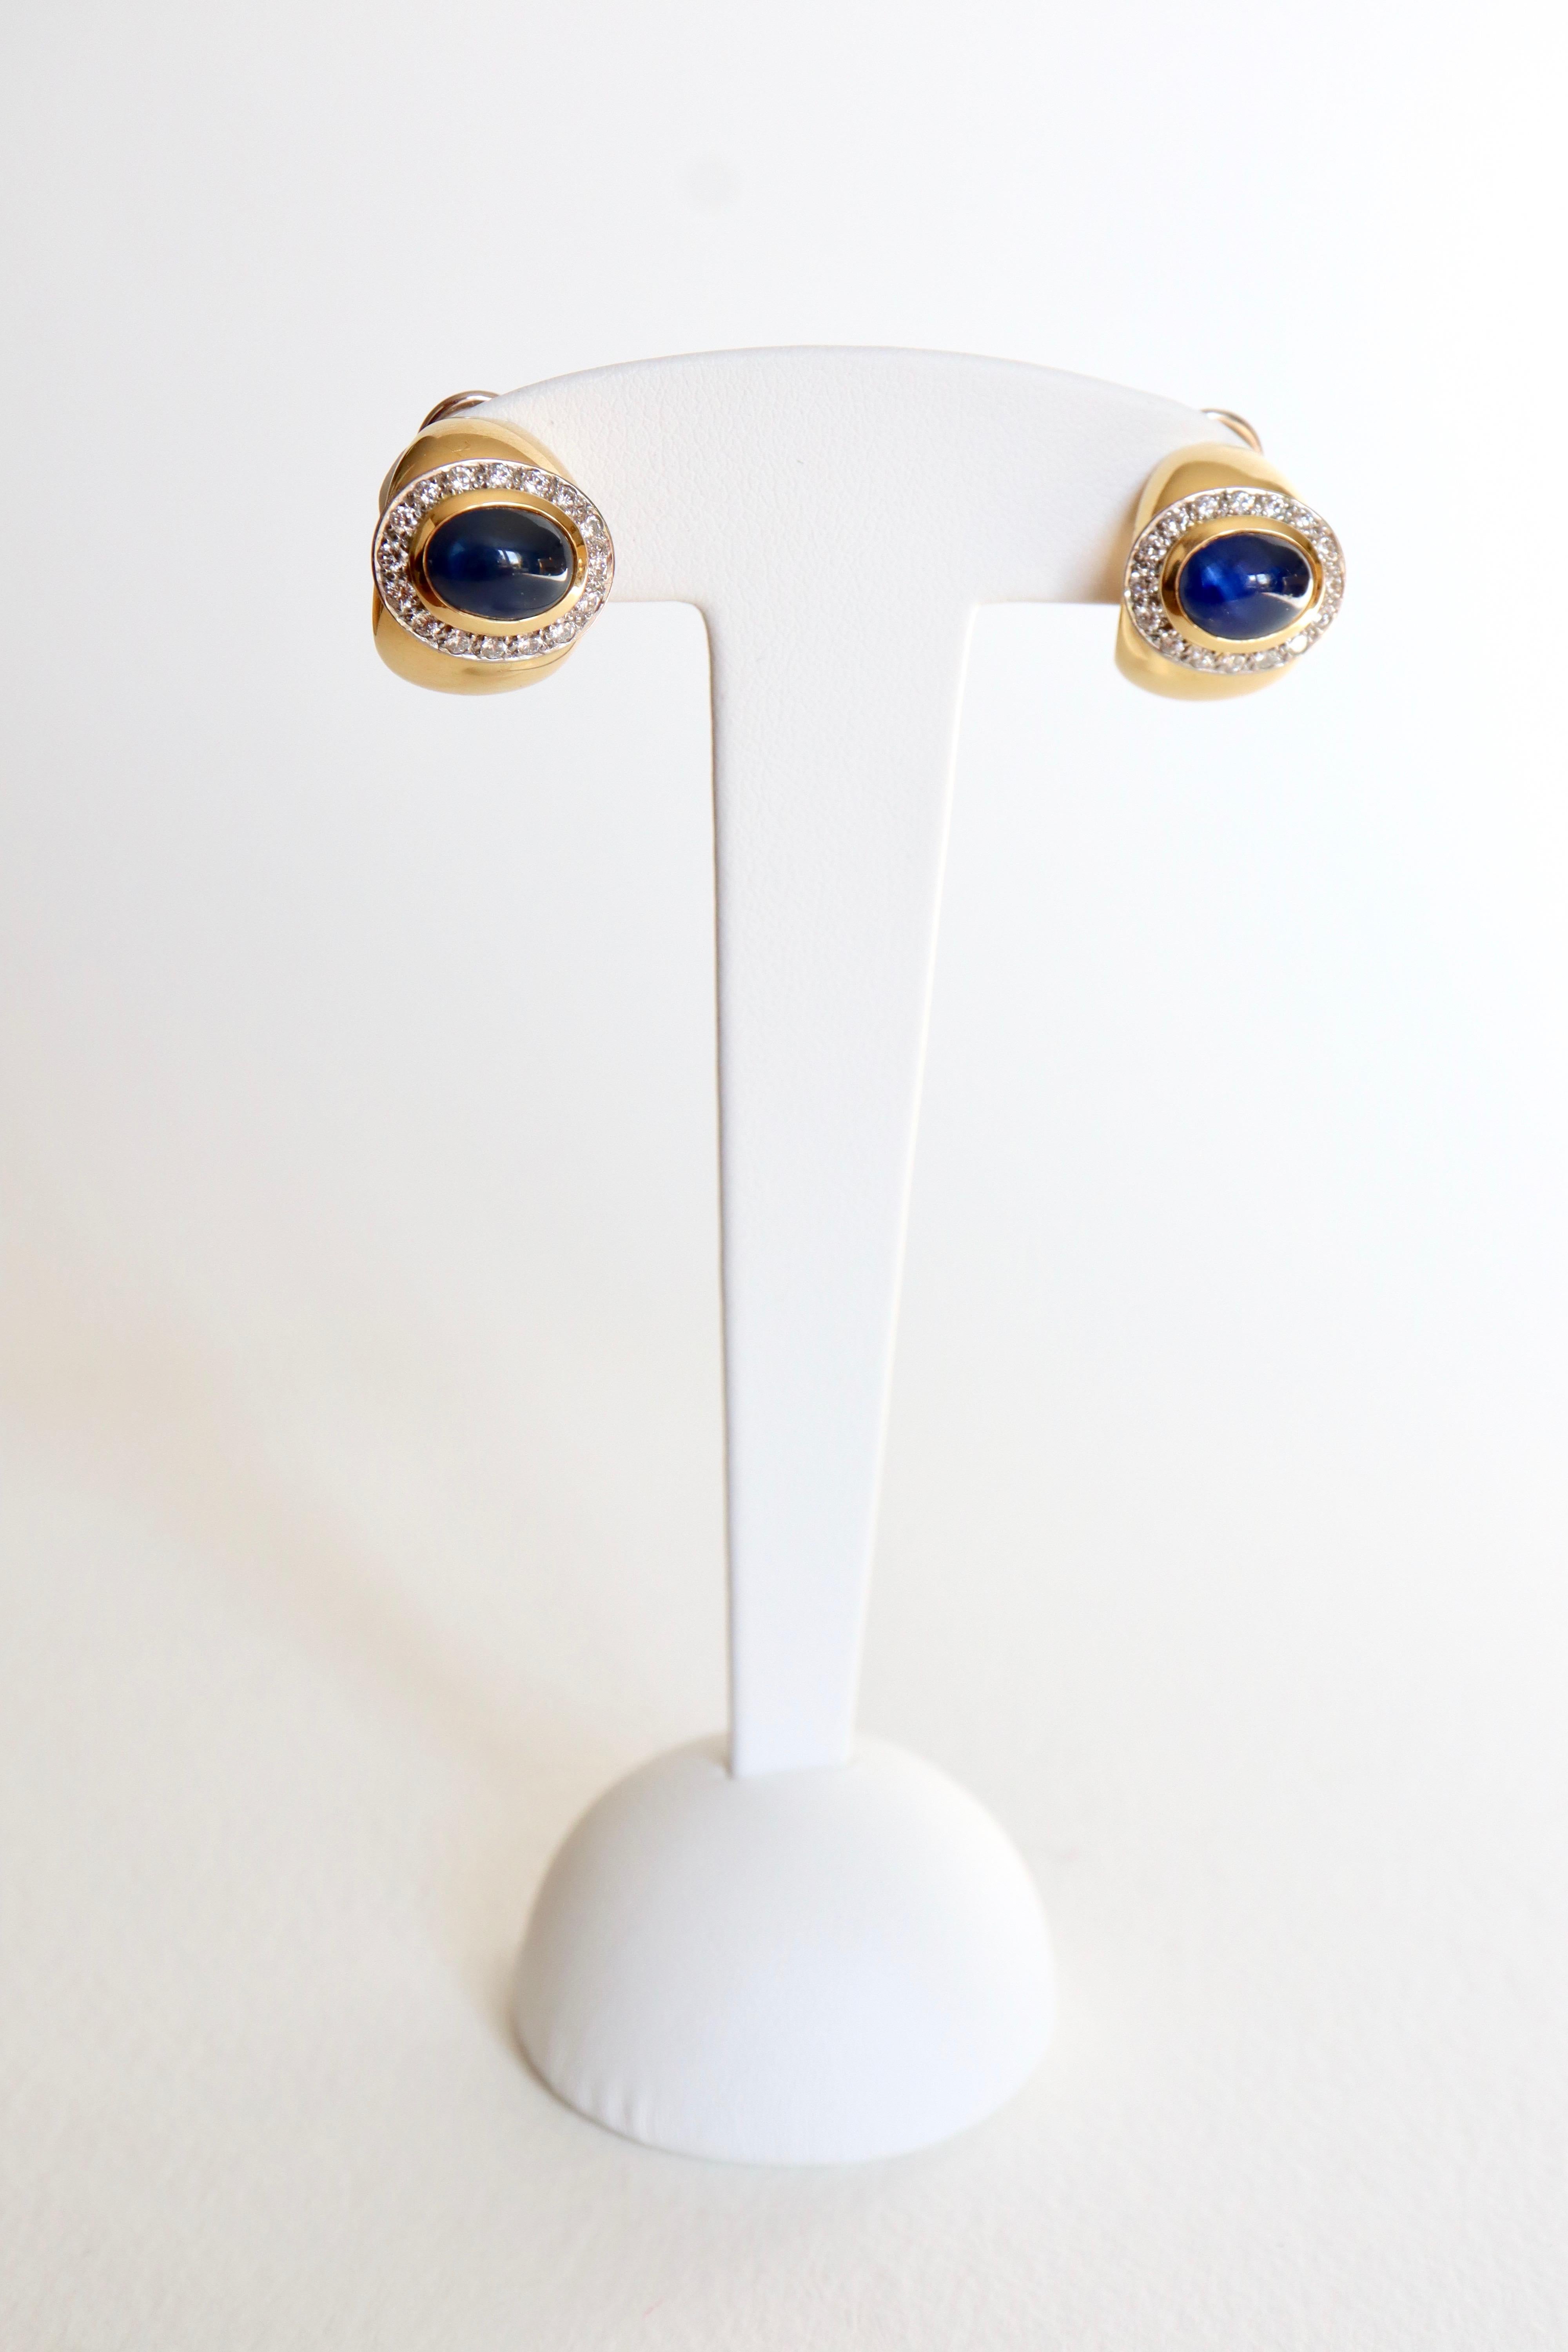 Wempe 18 Karat Yellow Gold and White Gold Earrings Set with Cabochon Sapphires 4